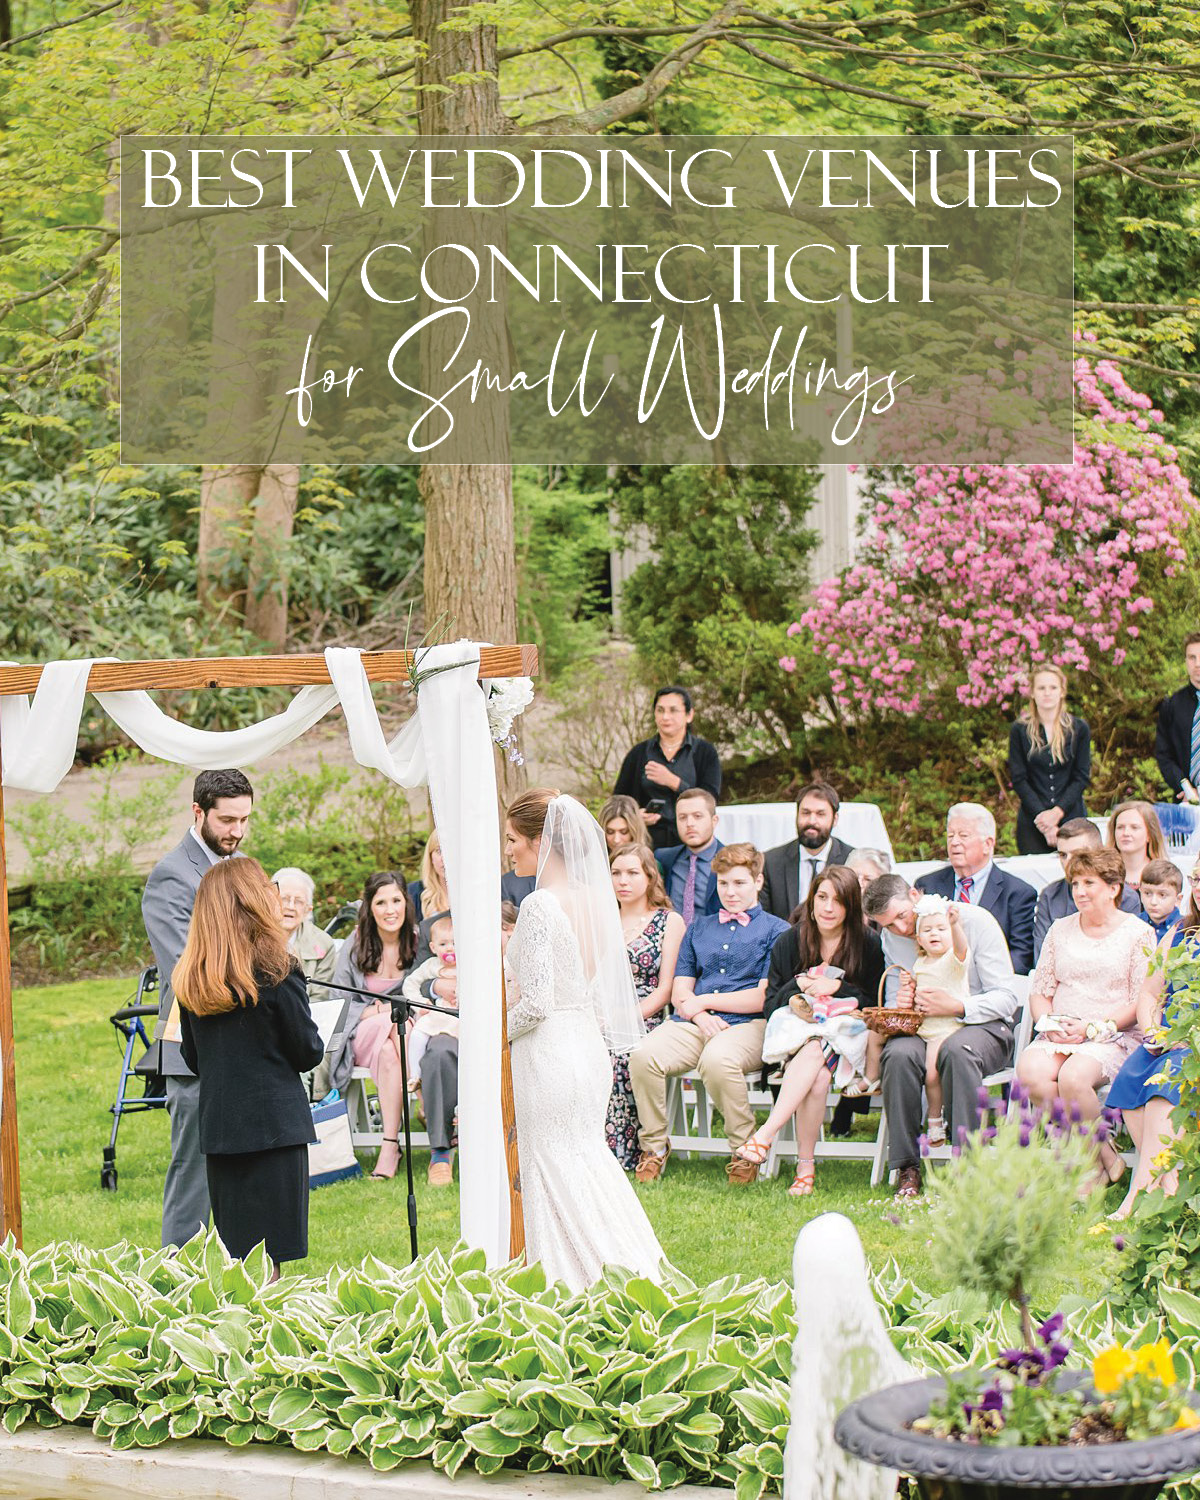 graphic for best wedding venues in Connecticut for small wedding